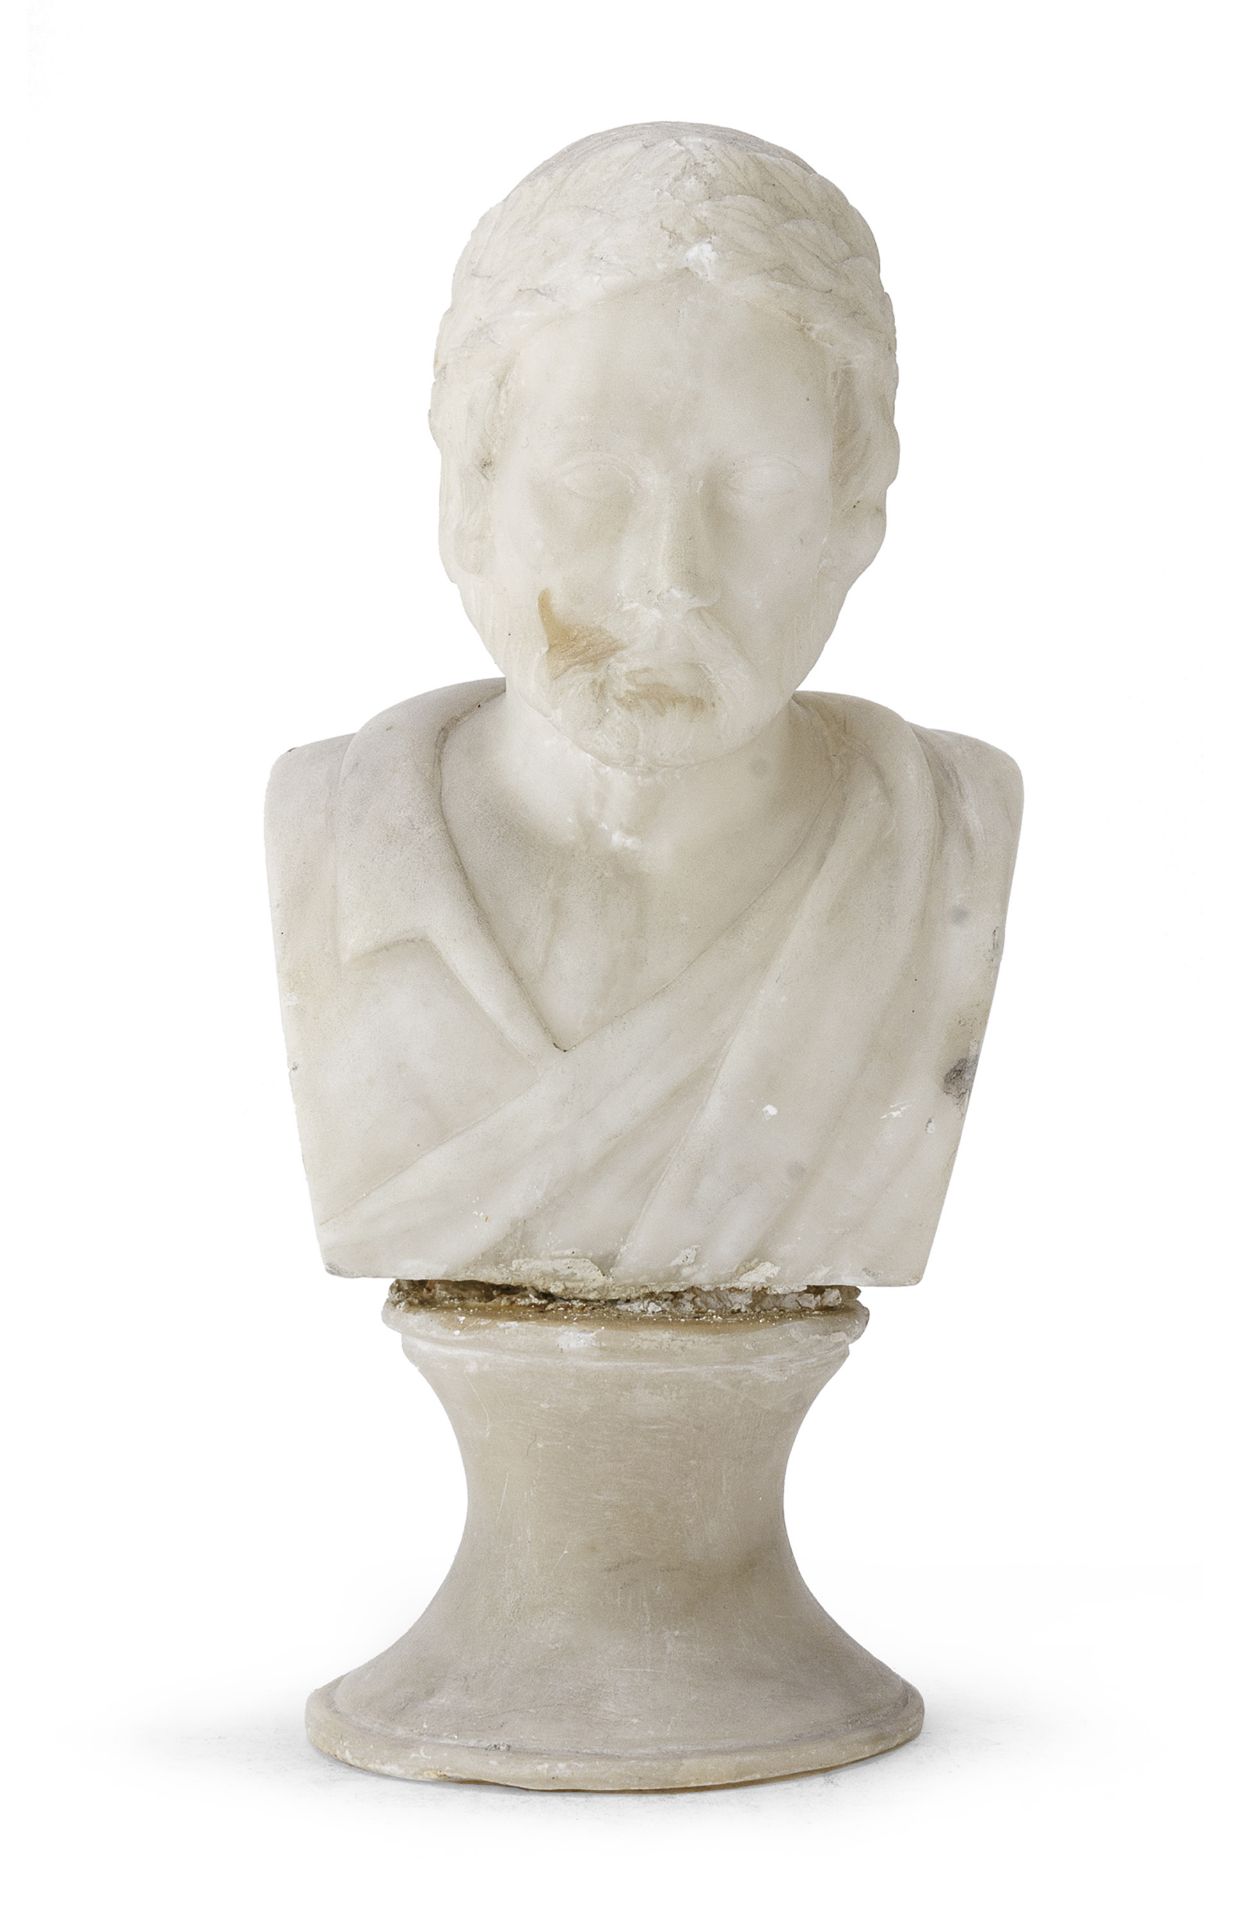 ALABASTER BUST OF A ROMAN FIGURE 19TH CENTURY